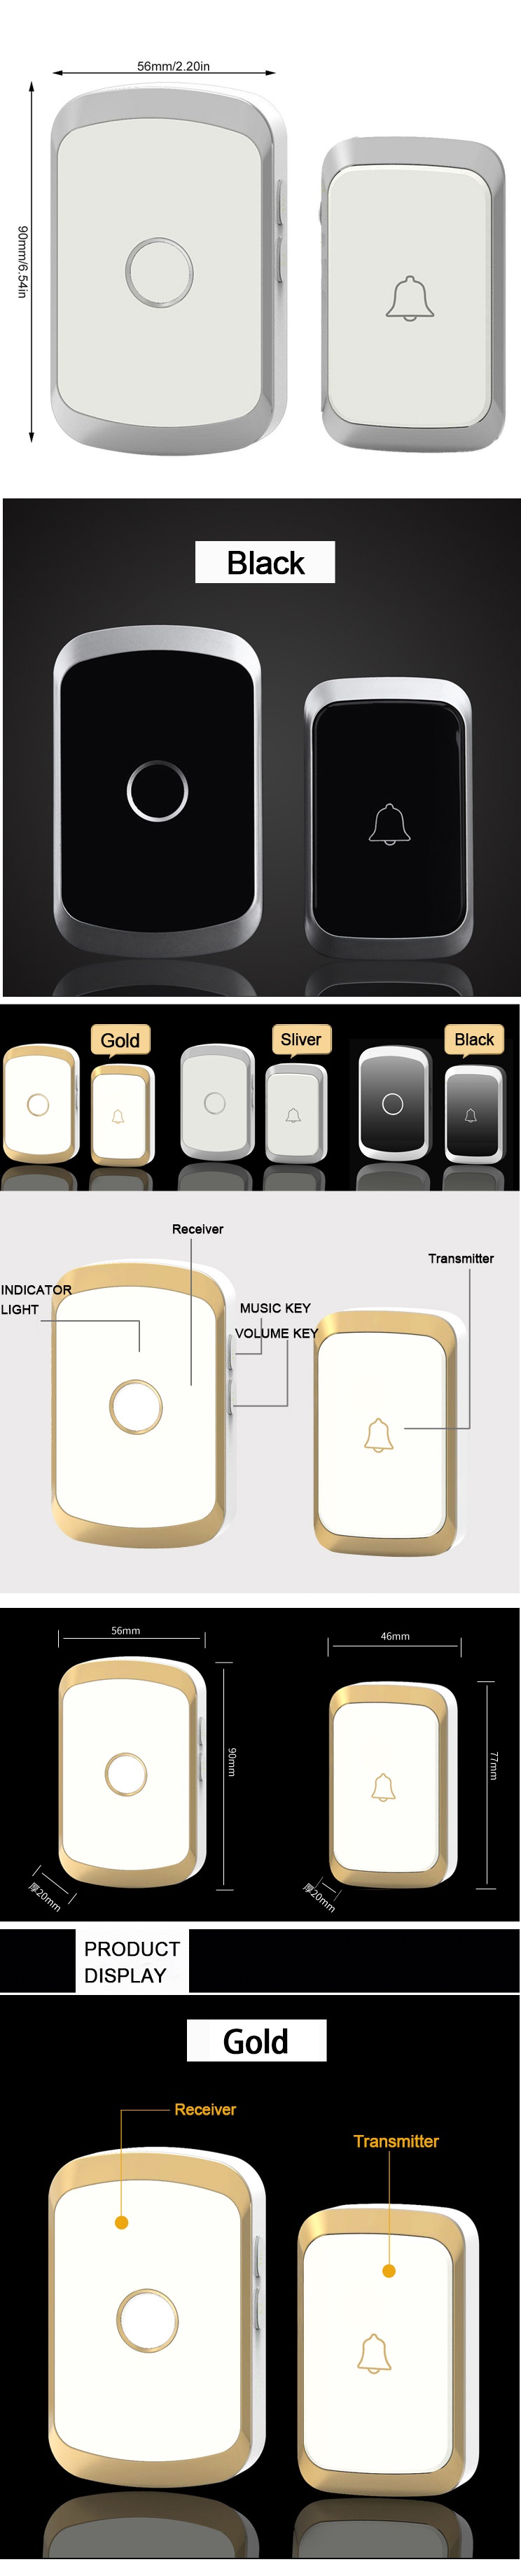 CACAZI-A20-Wireless-Music-Doorbell-Waterproof-AC-110-220V-300M-Remote-Door-Bell-1-Button-2-Receivers-1613726-5